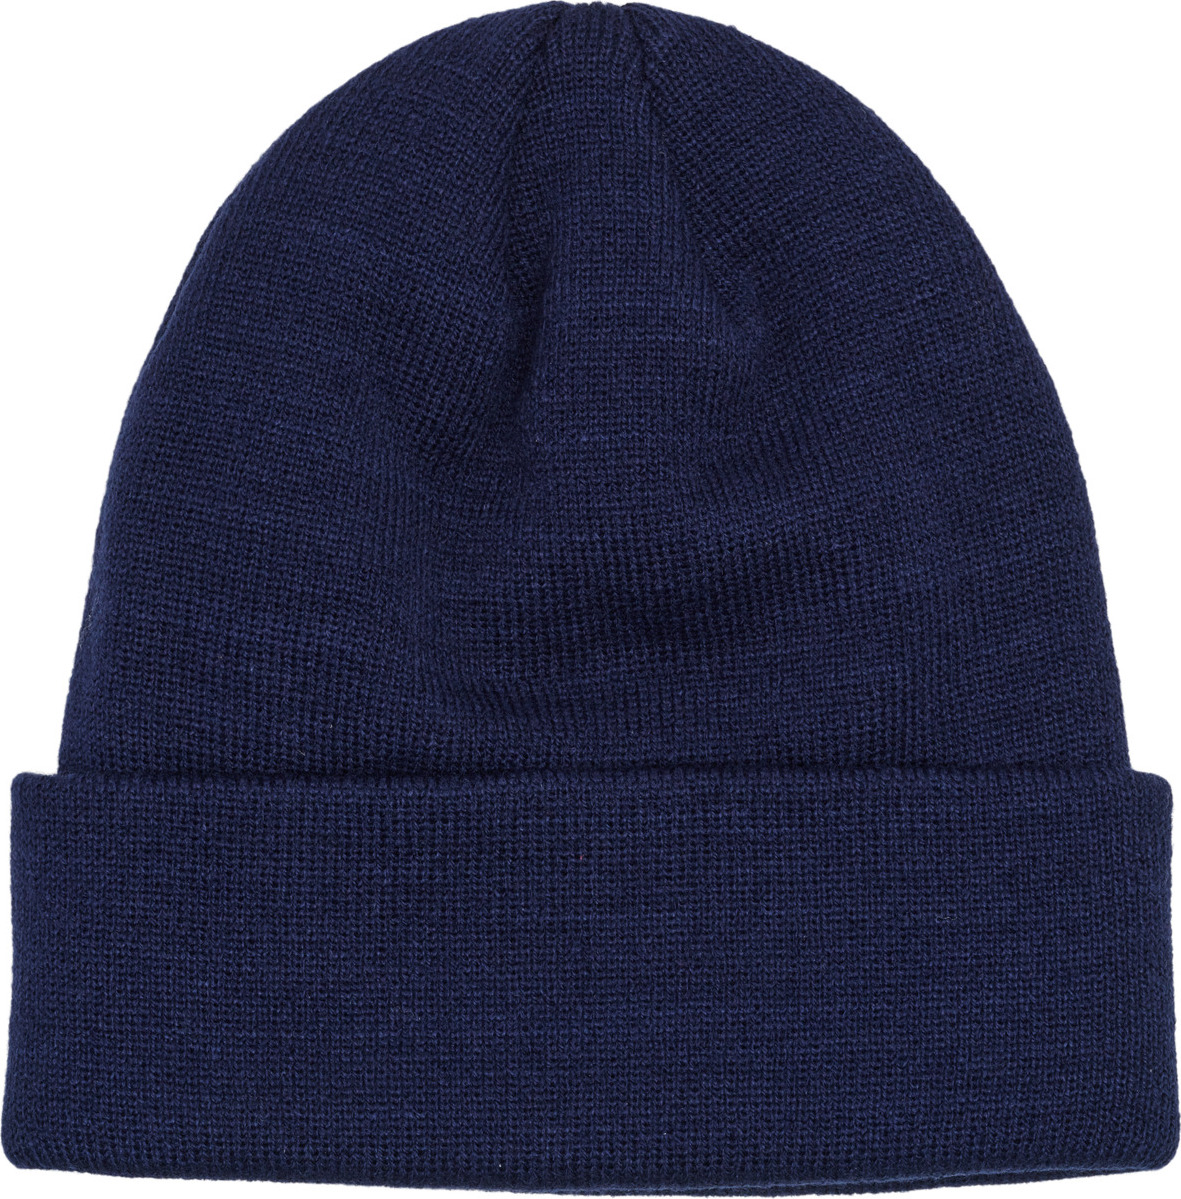 hmlLEGACY | Buy hmlLEGACY Outnorth Beanie Core Core here Peacoat Peacoat Beanie |